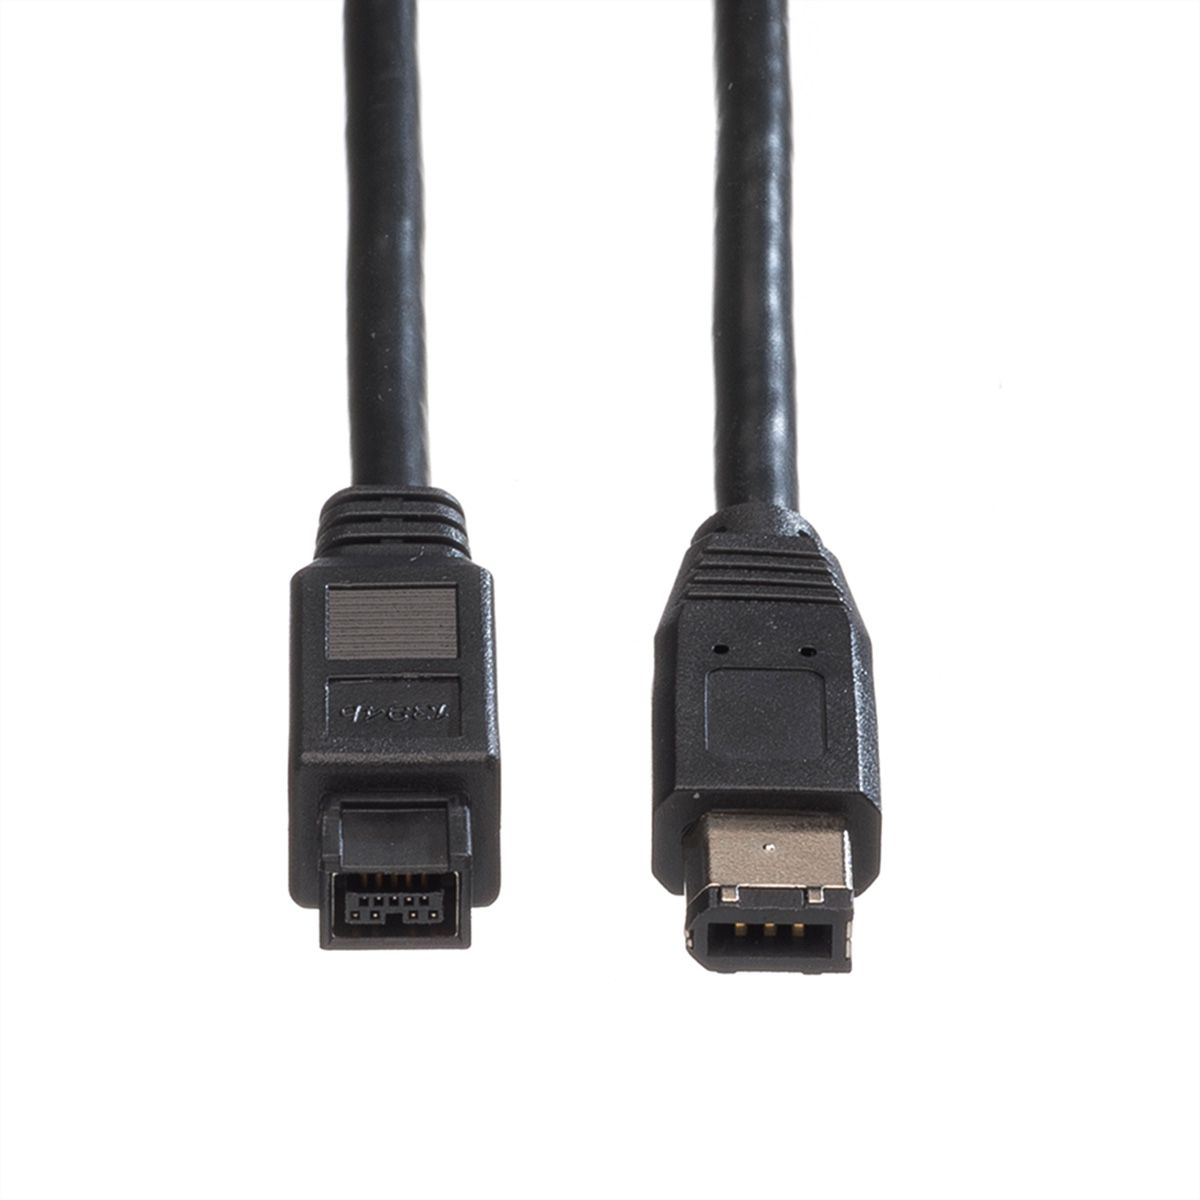 FWP-44-10 Gembird Firewire IEEE 1394 cable 4P4P 10ft length 